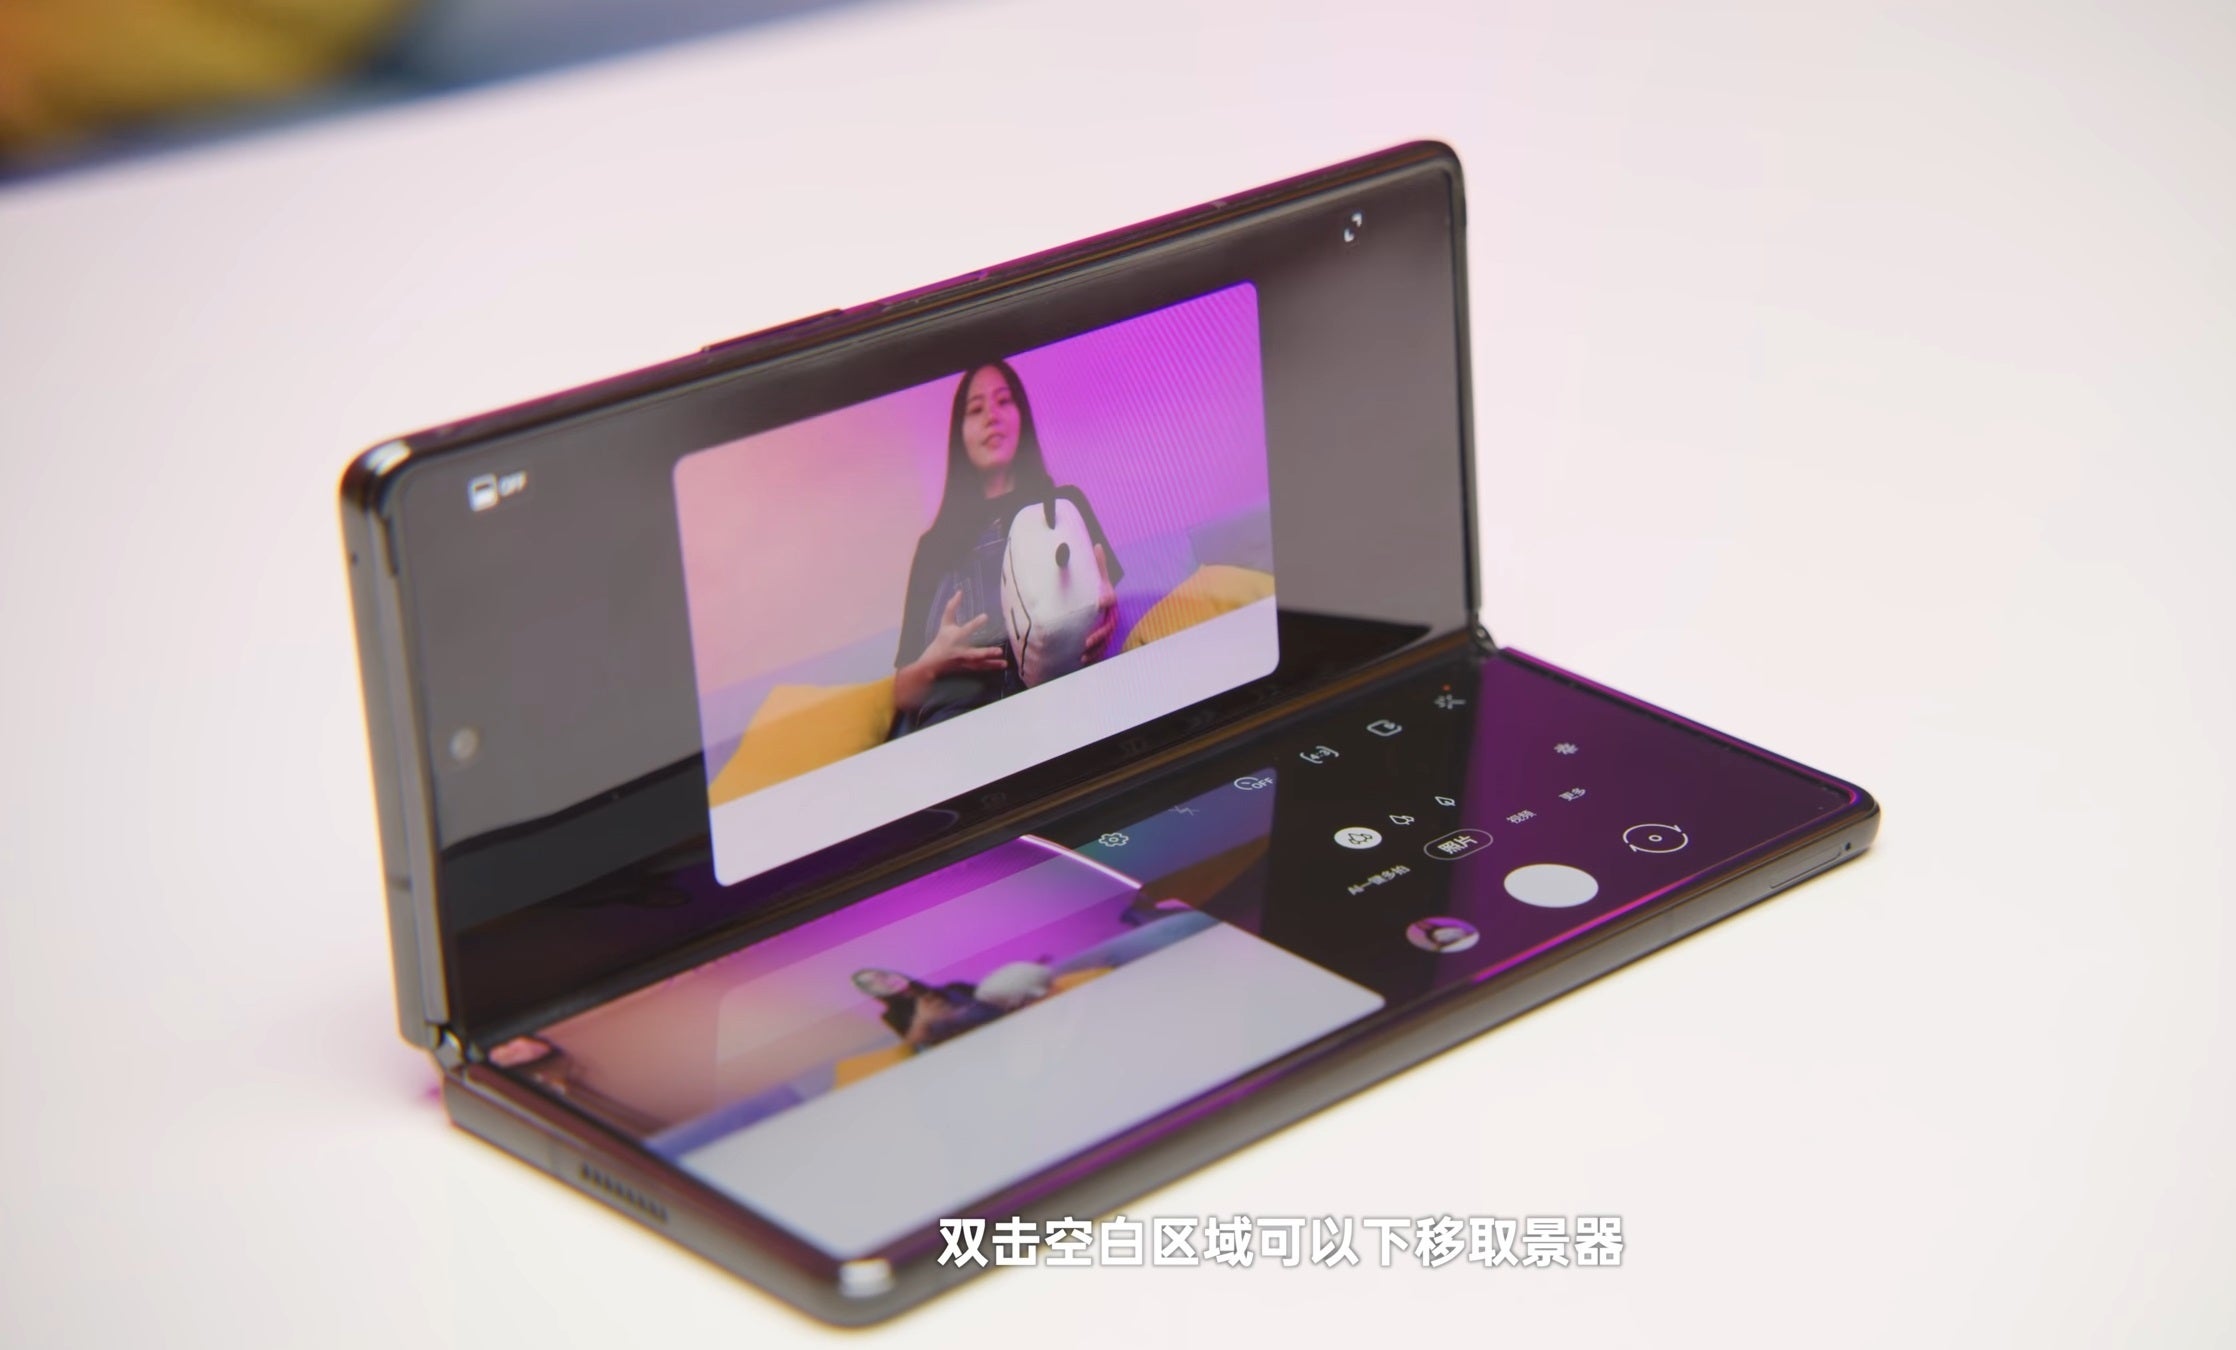 The Galaxy Z Fold 2 can serve as its own stand - Early review of the Galaxy Z Fold 2 leaves nothing hidden, gives most detailed look of the phone yet